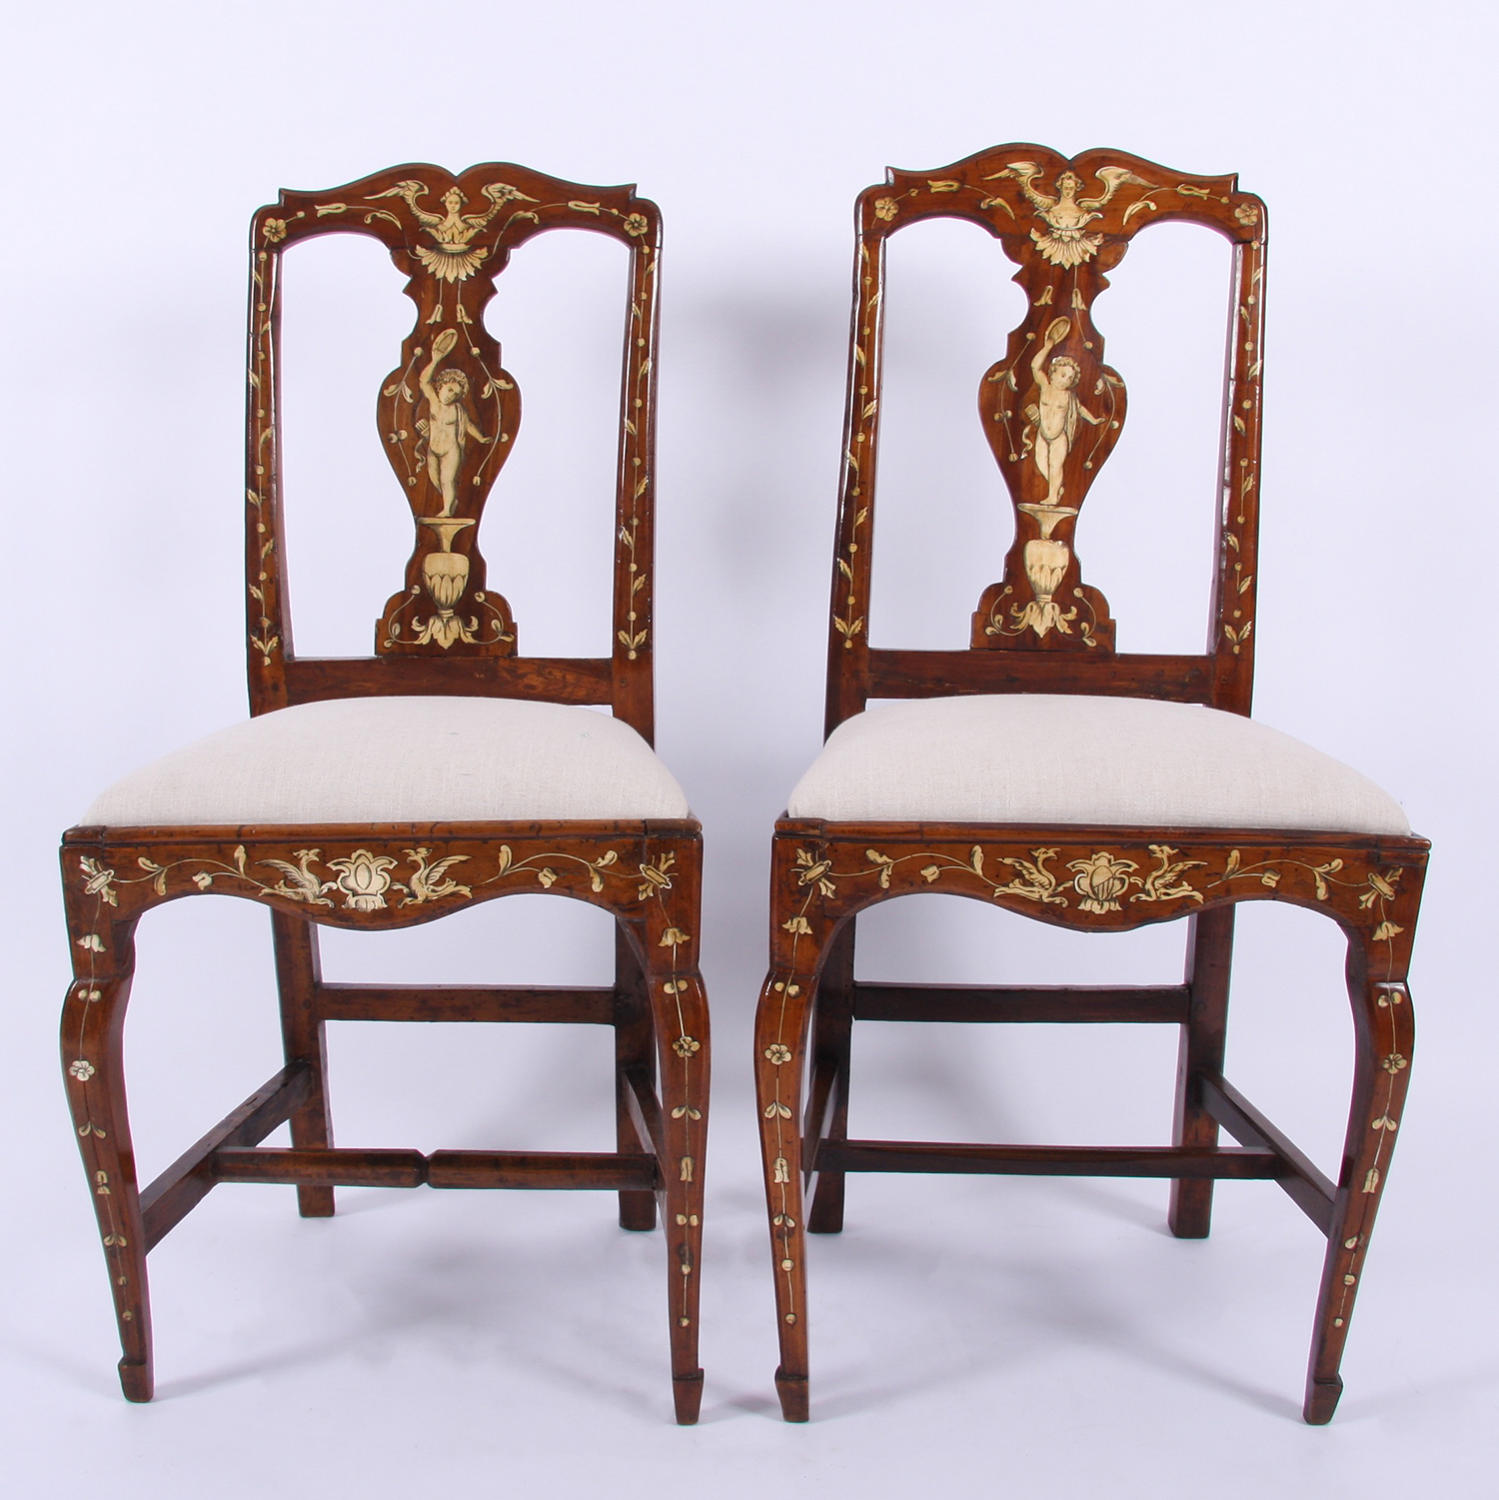 Pair of Ivory Inlaid Chairs